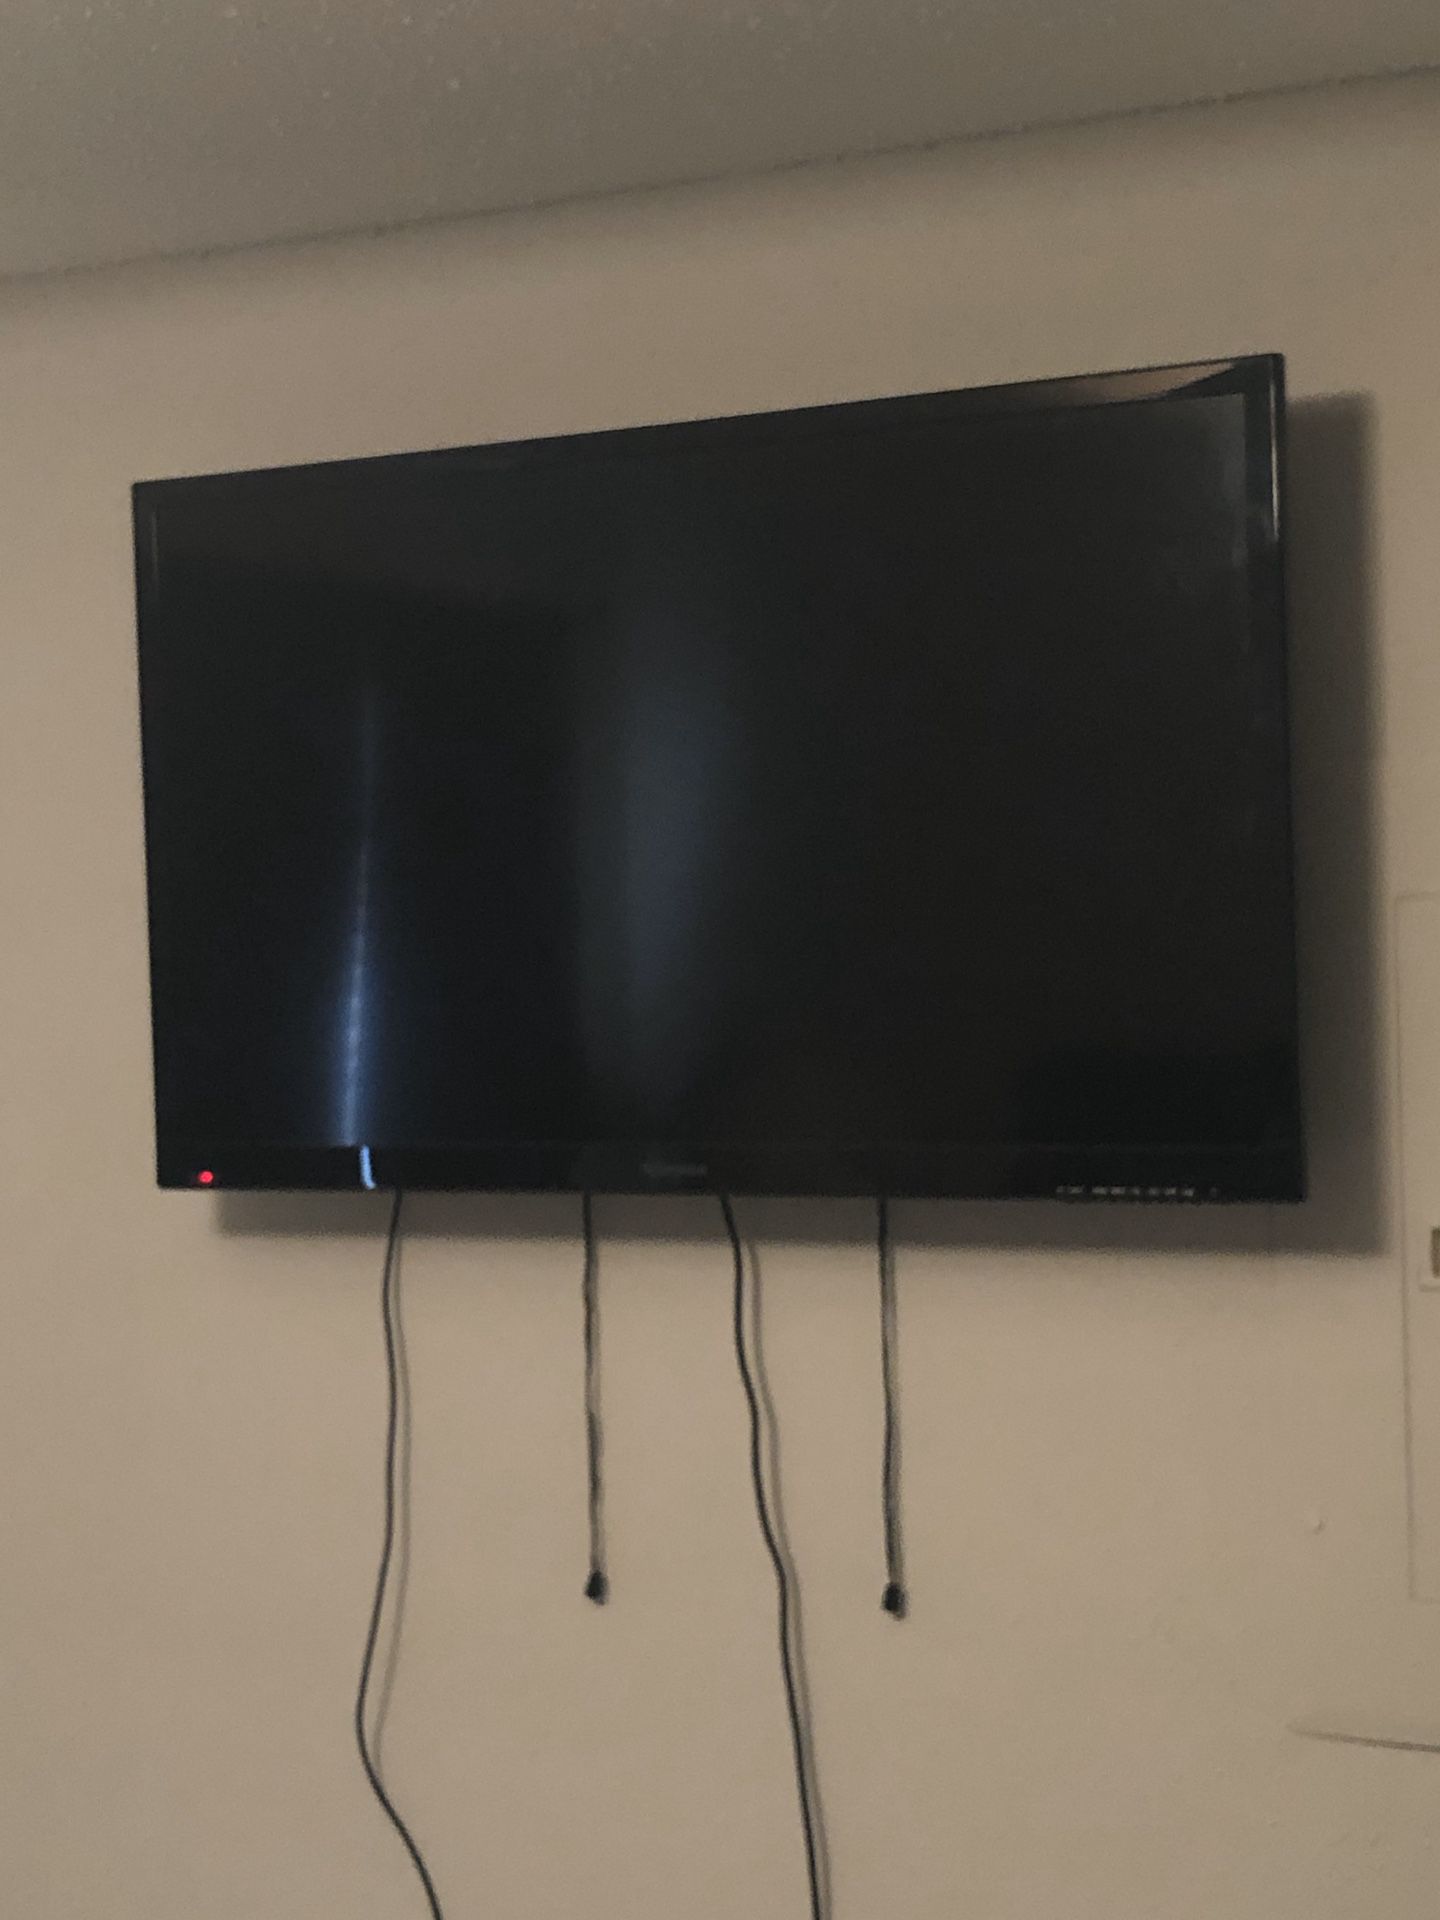 32 inch vizio with built in DVD player